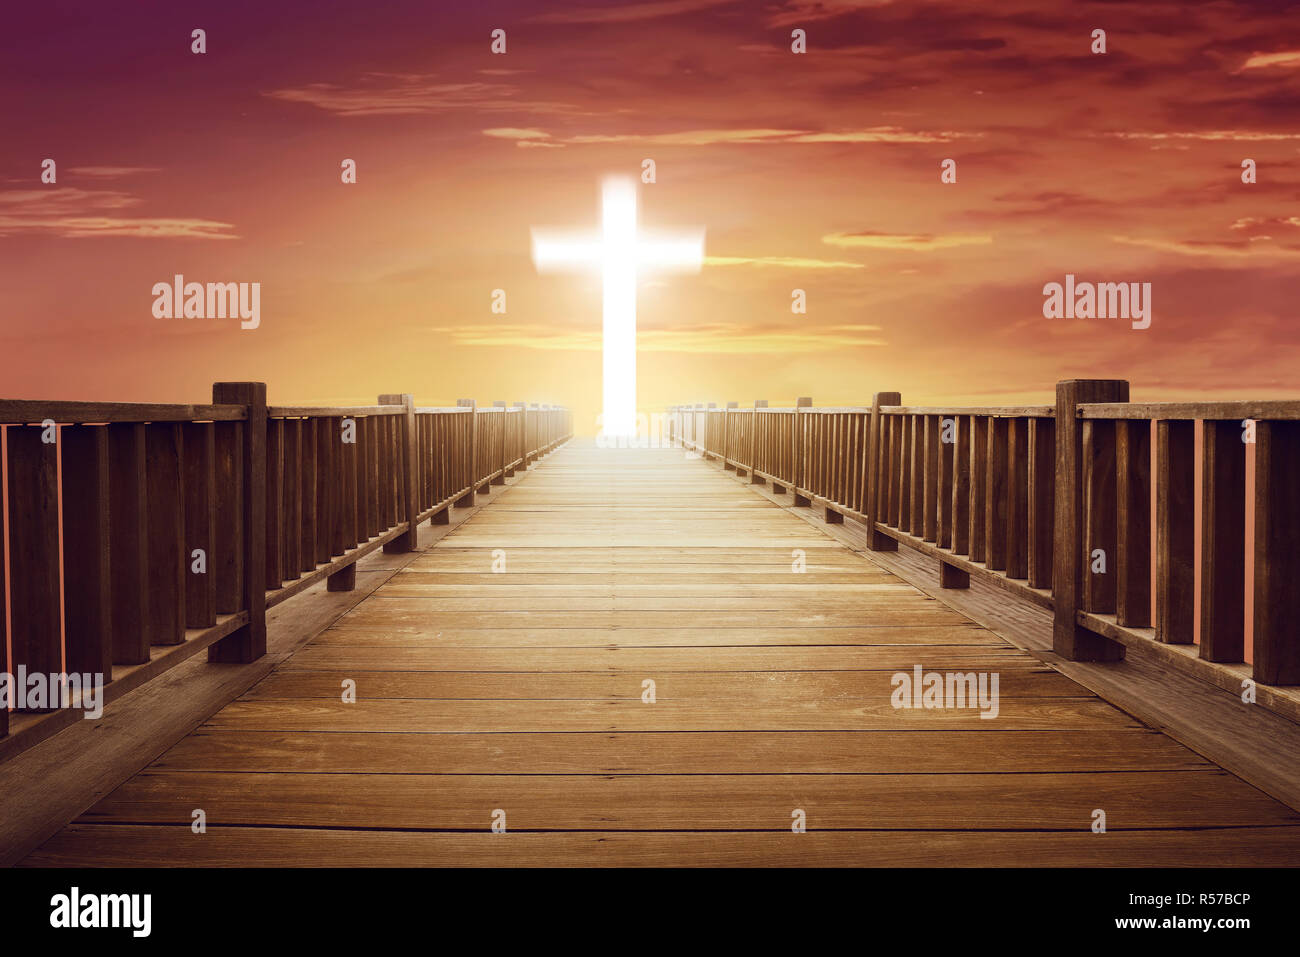 Shine cross shape in the end of wooden path Stock Photo